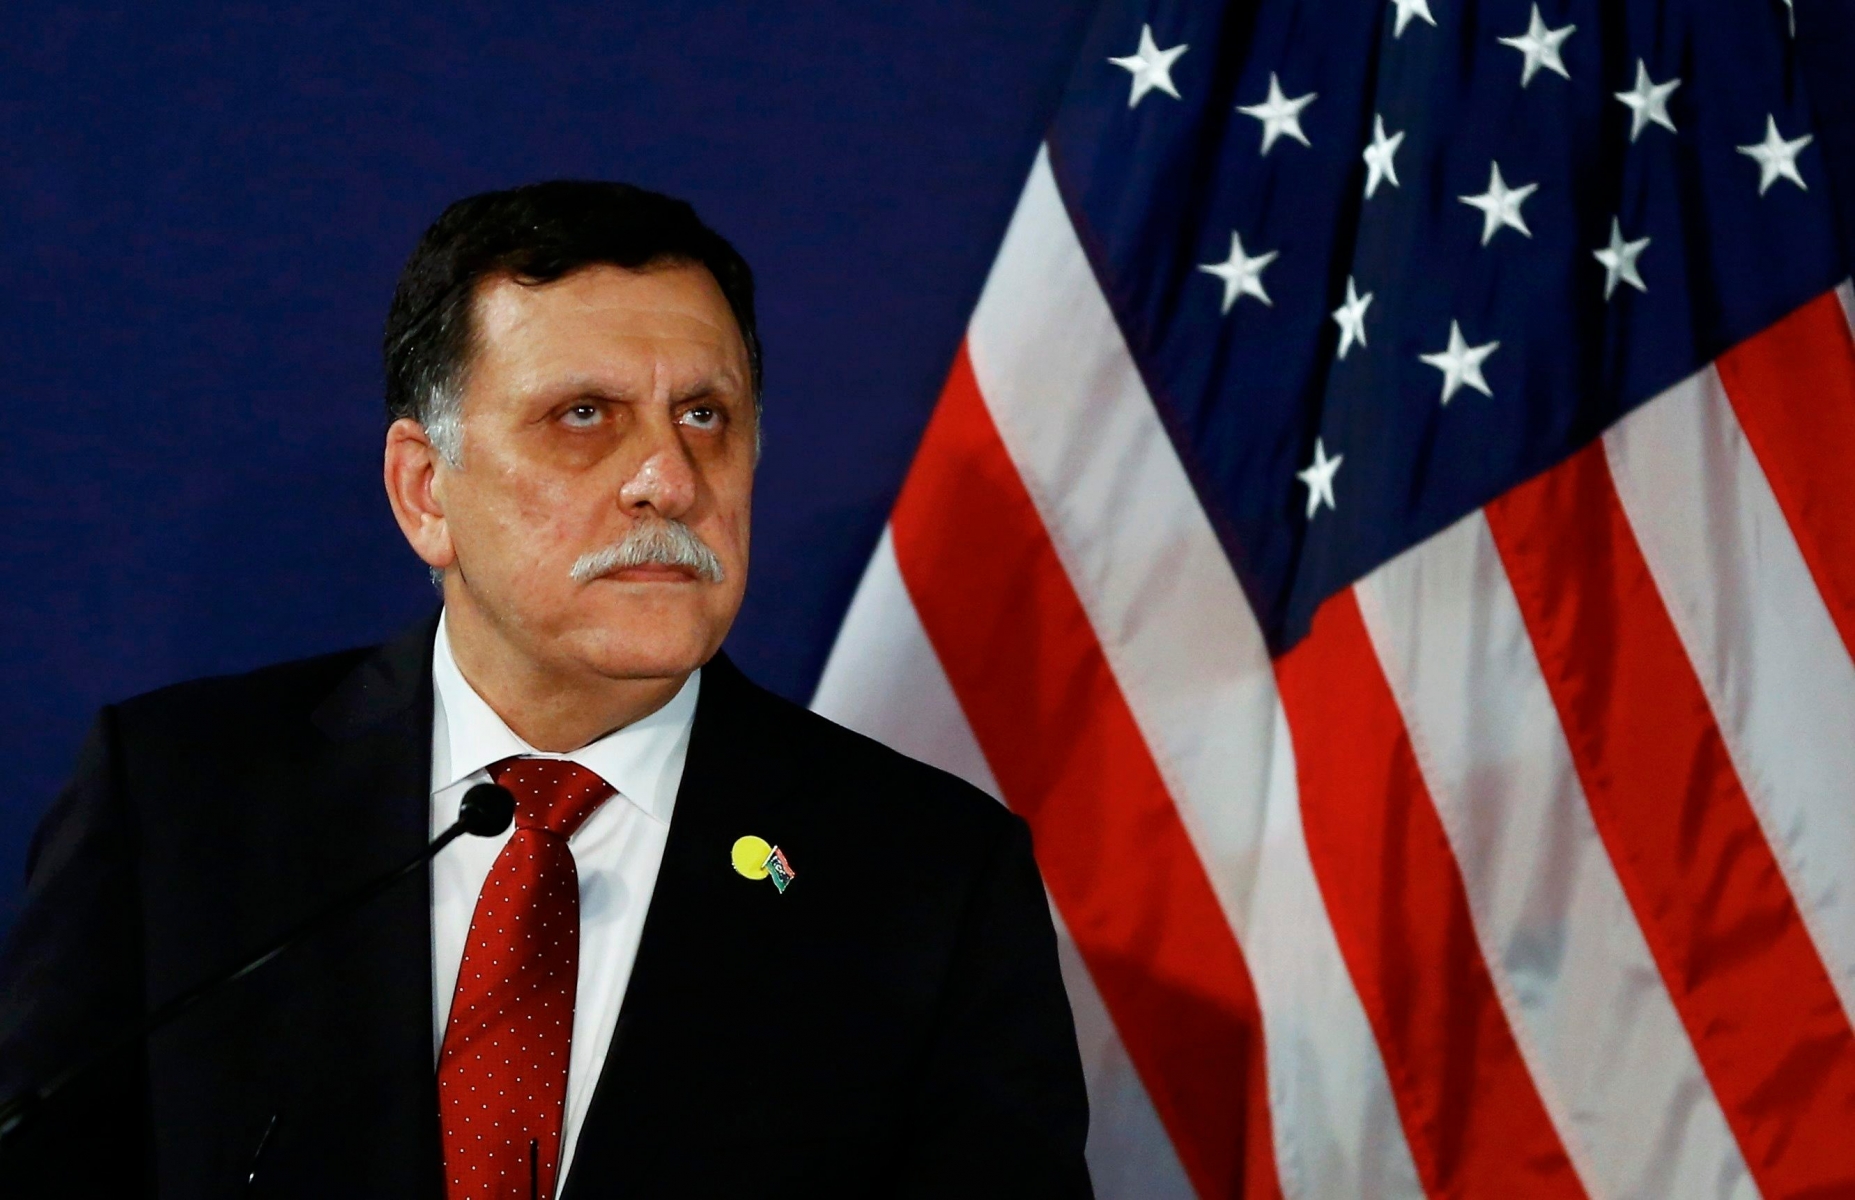 FILE - In this May 16, 2106 file-pool photo, Fayez al-Sarraj, the head of the U.N.-brokered presidency council, attends a news conference in Vienna, Austria. The U.S. launched multiple airstrikes against Islamic State militants Monday, Aug. 1, 2016, opening a new, more persistent front against the group at the request of the UN-backed Libyan government, Libyan and U.S. officials said. Serraj, said in a televised statement that American warplanes attacked the IS bastion of Sirte. No U.S. ground forces will be deployed, he said. (Leonhard Foeger/Pool Photo via AP, File) US Libya